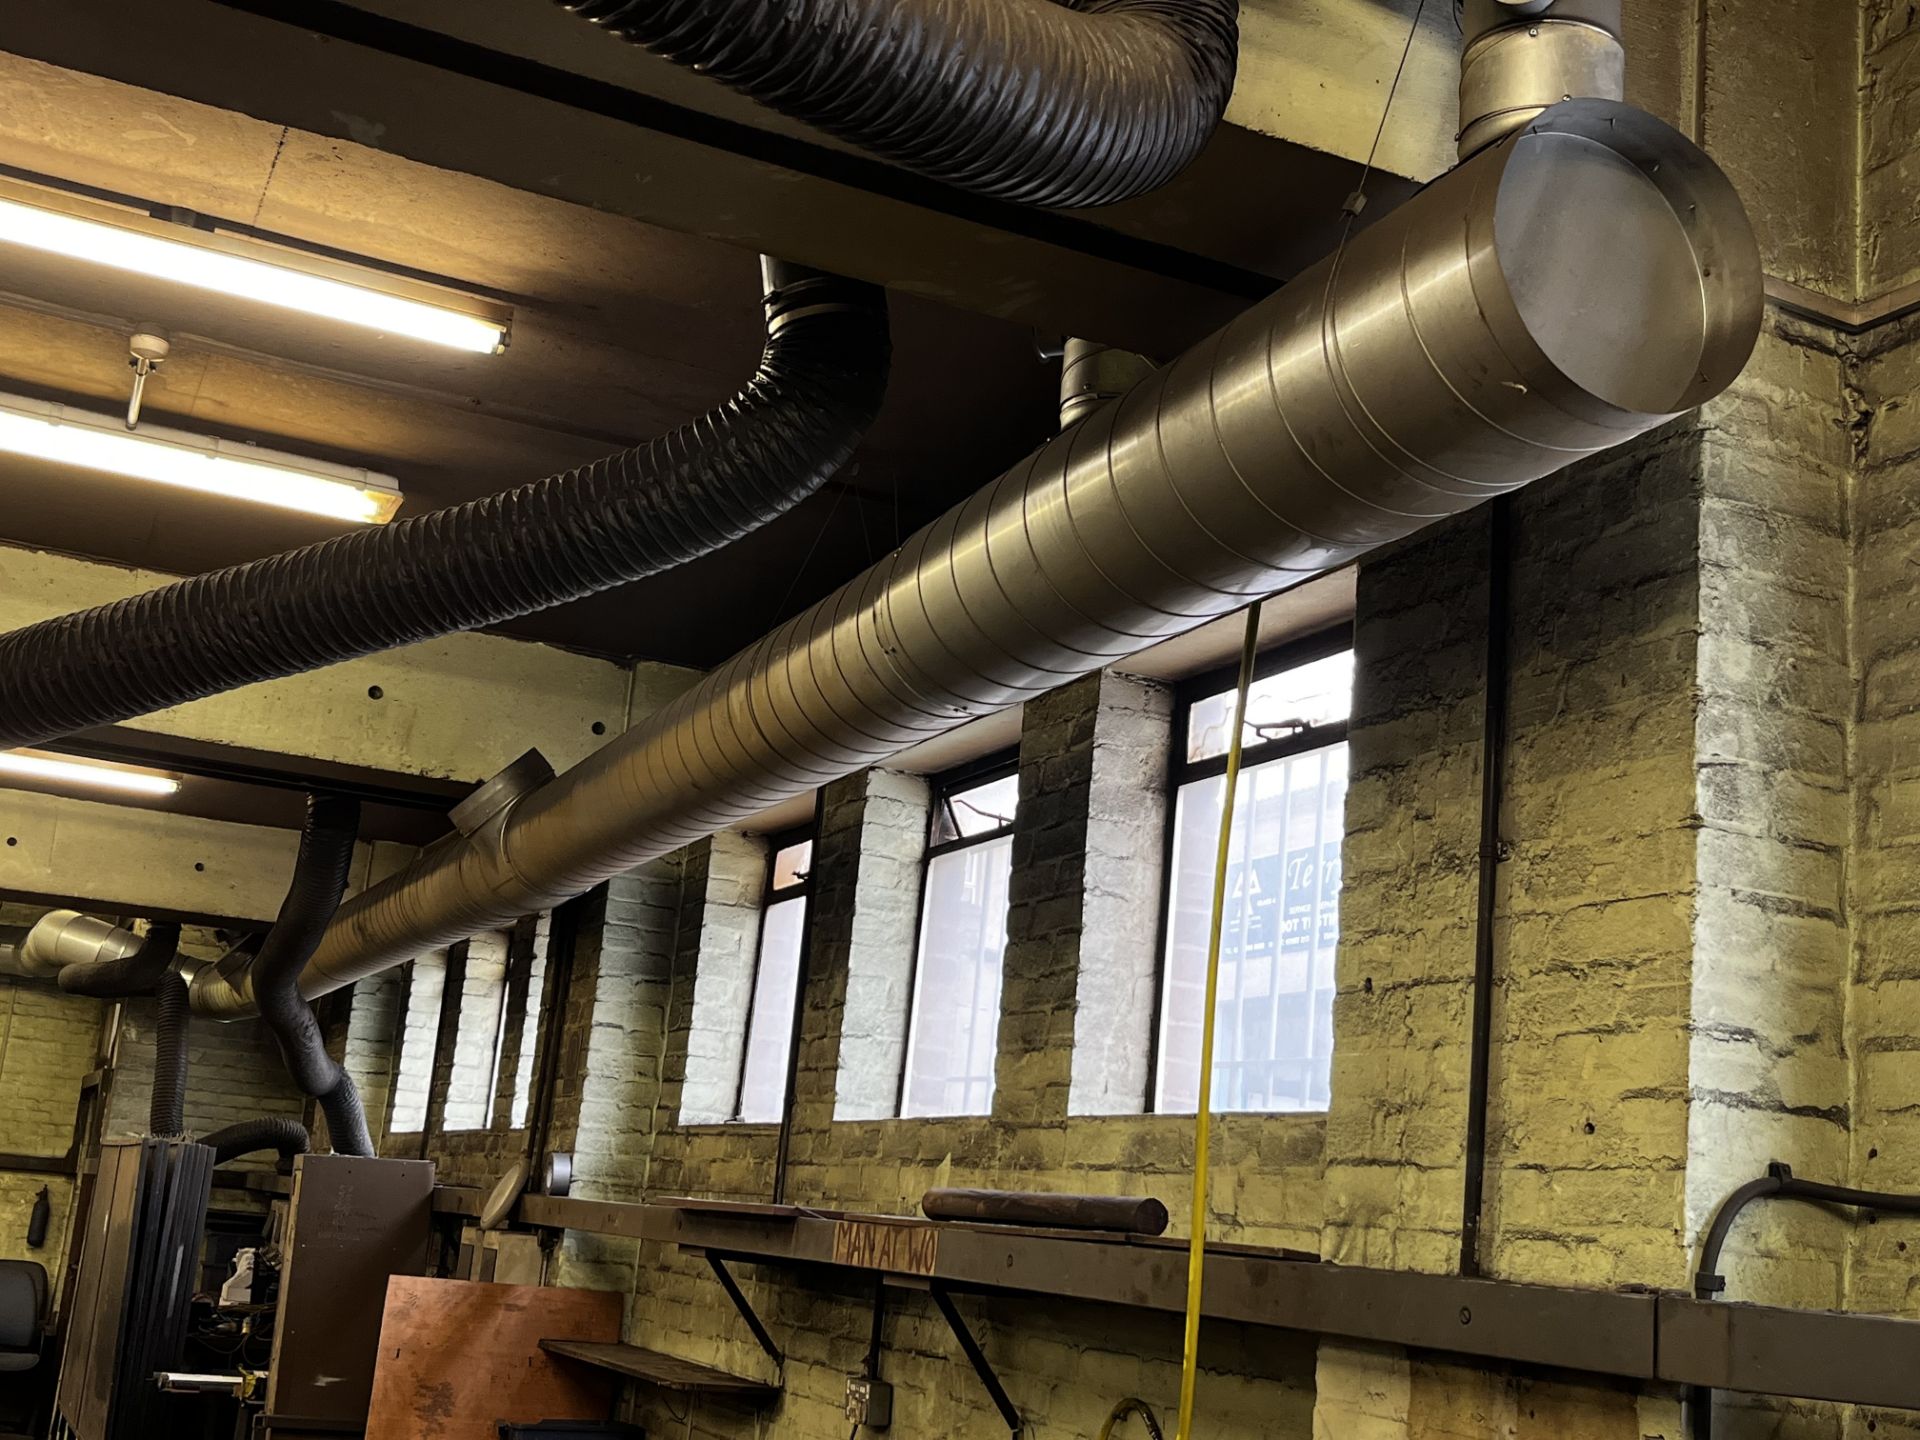 Fume Extraction System throughout Workshop, Comprising Extraction Hoses, Ducting & Exterior - Image 3 of 4